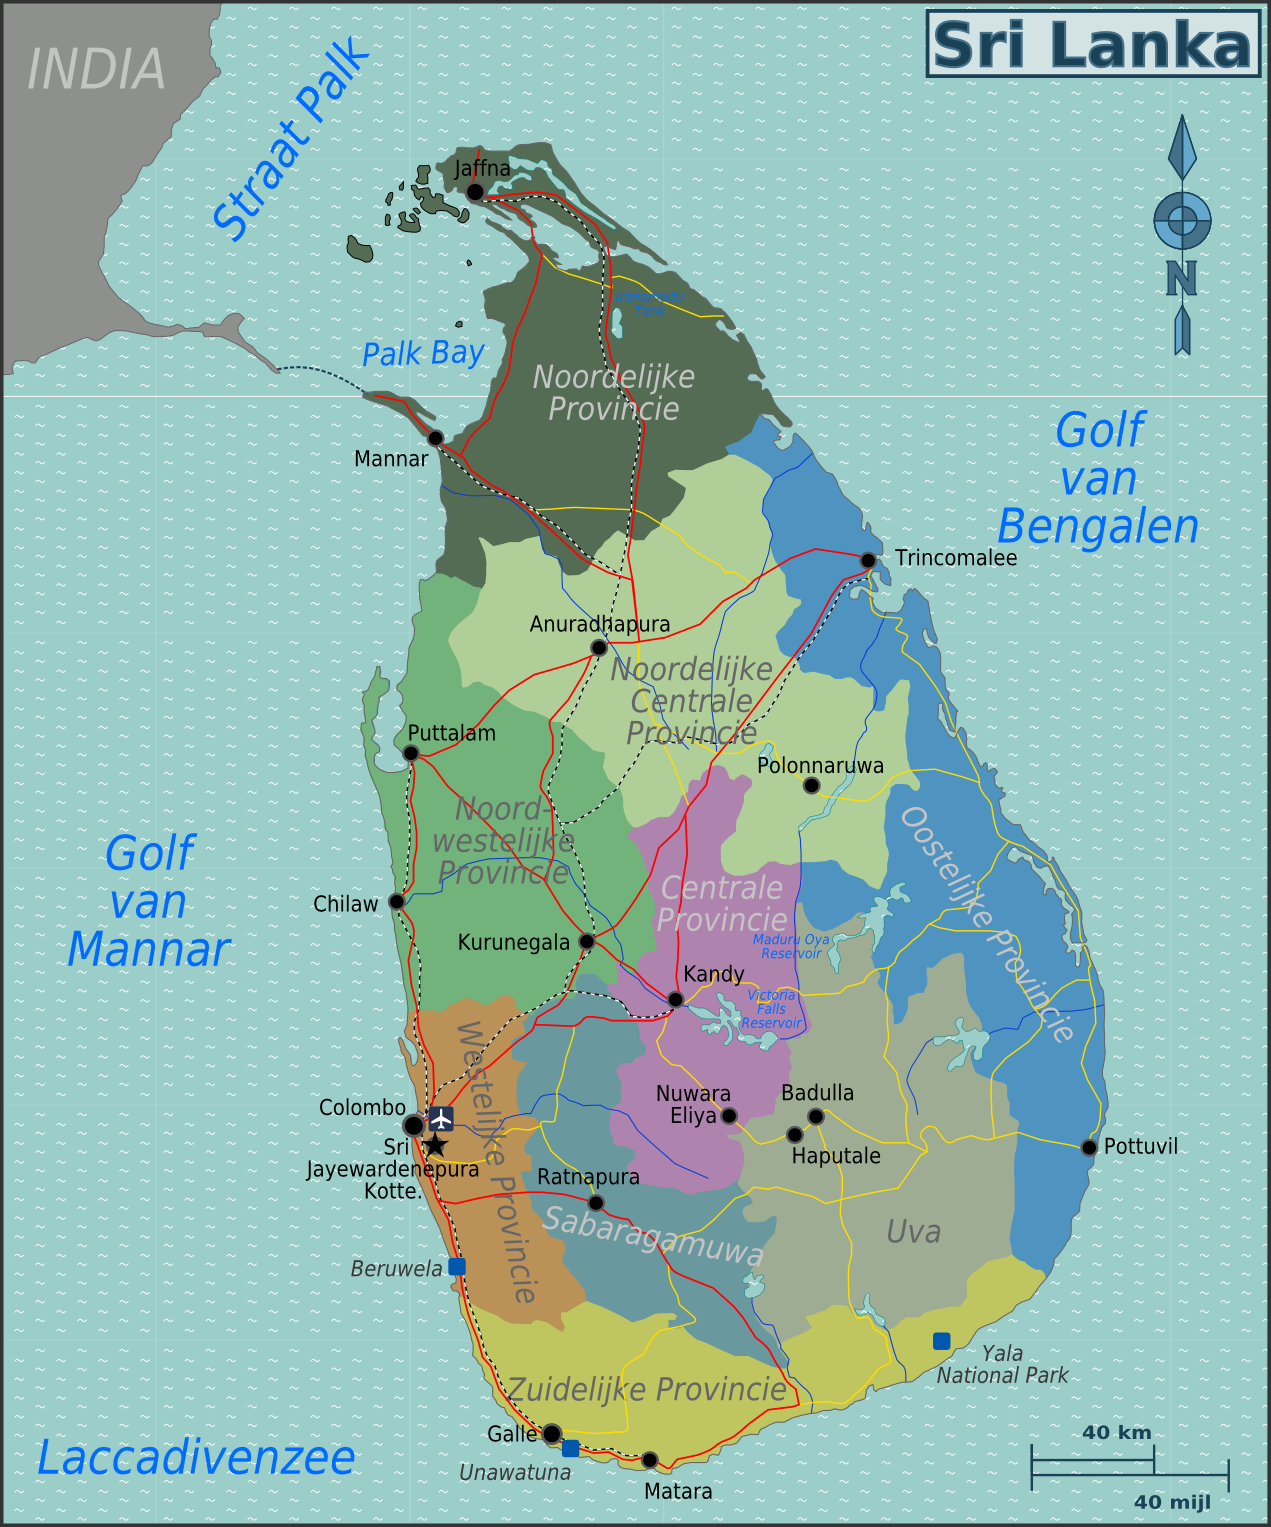 Map of Sri Lanka broken up by districts